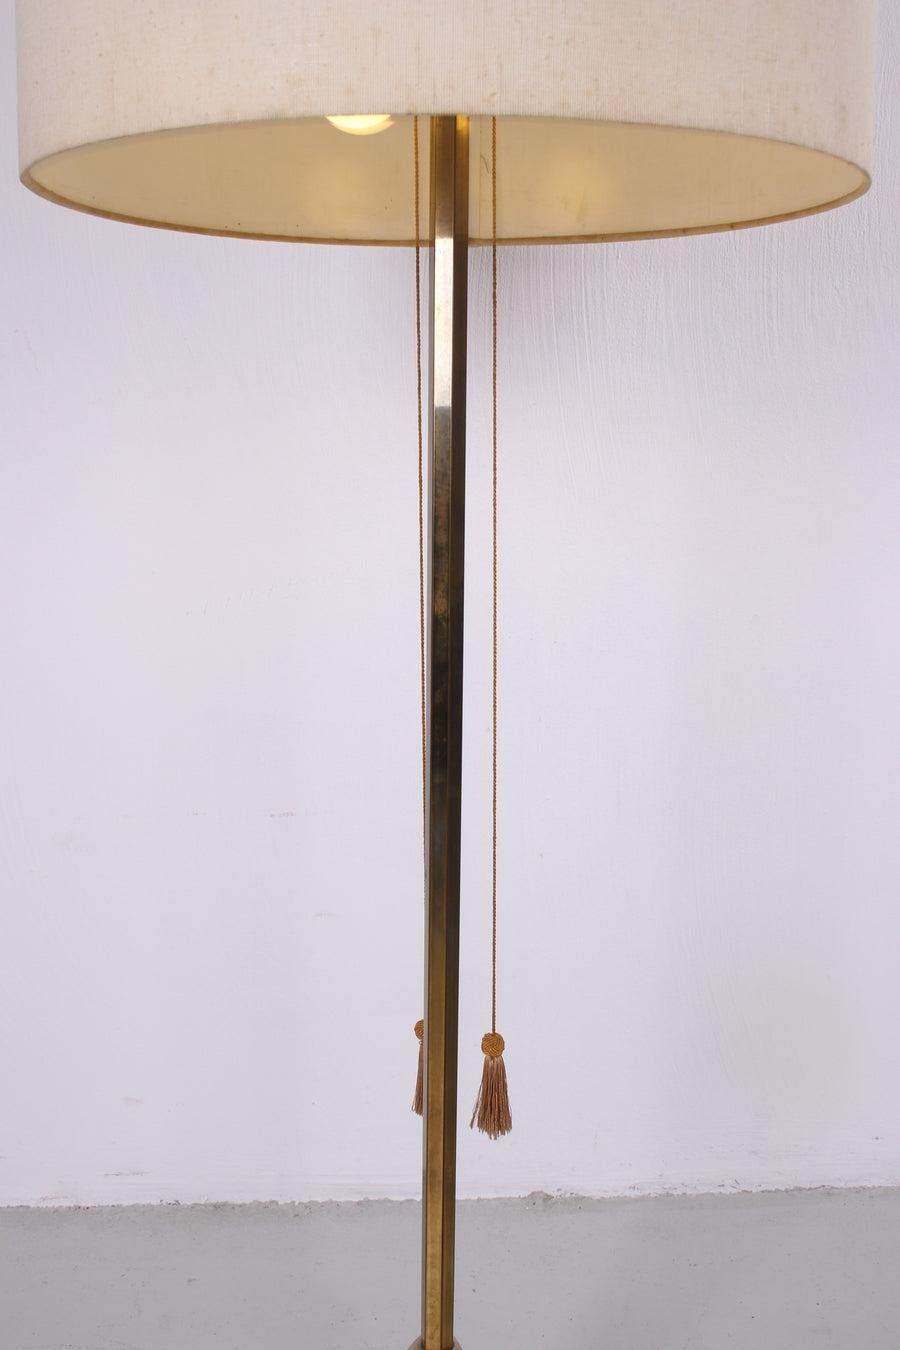 Vintage Floor Lamp with Cast Iron Base and Brass German, 1960s

Vintage floor lamp with a brass base and fabric shade. The stand consists of brass and cast iron base. The color of the fabric shade has a cream-like color. The floor lamp contains 2